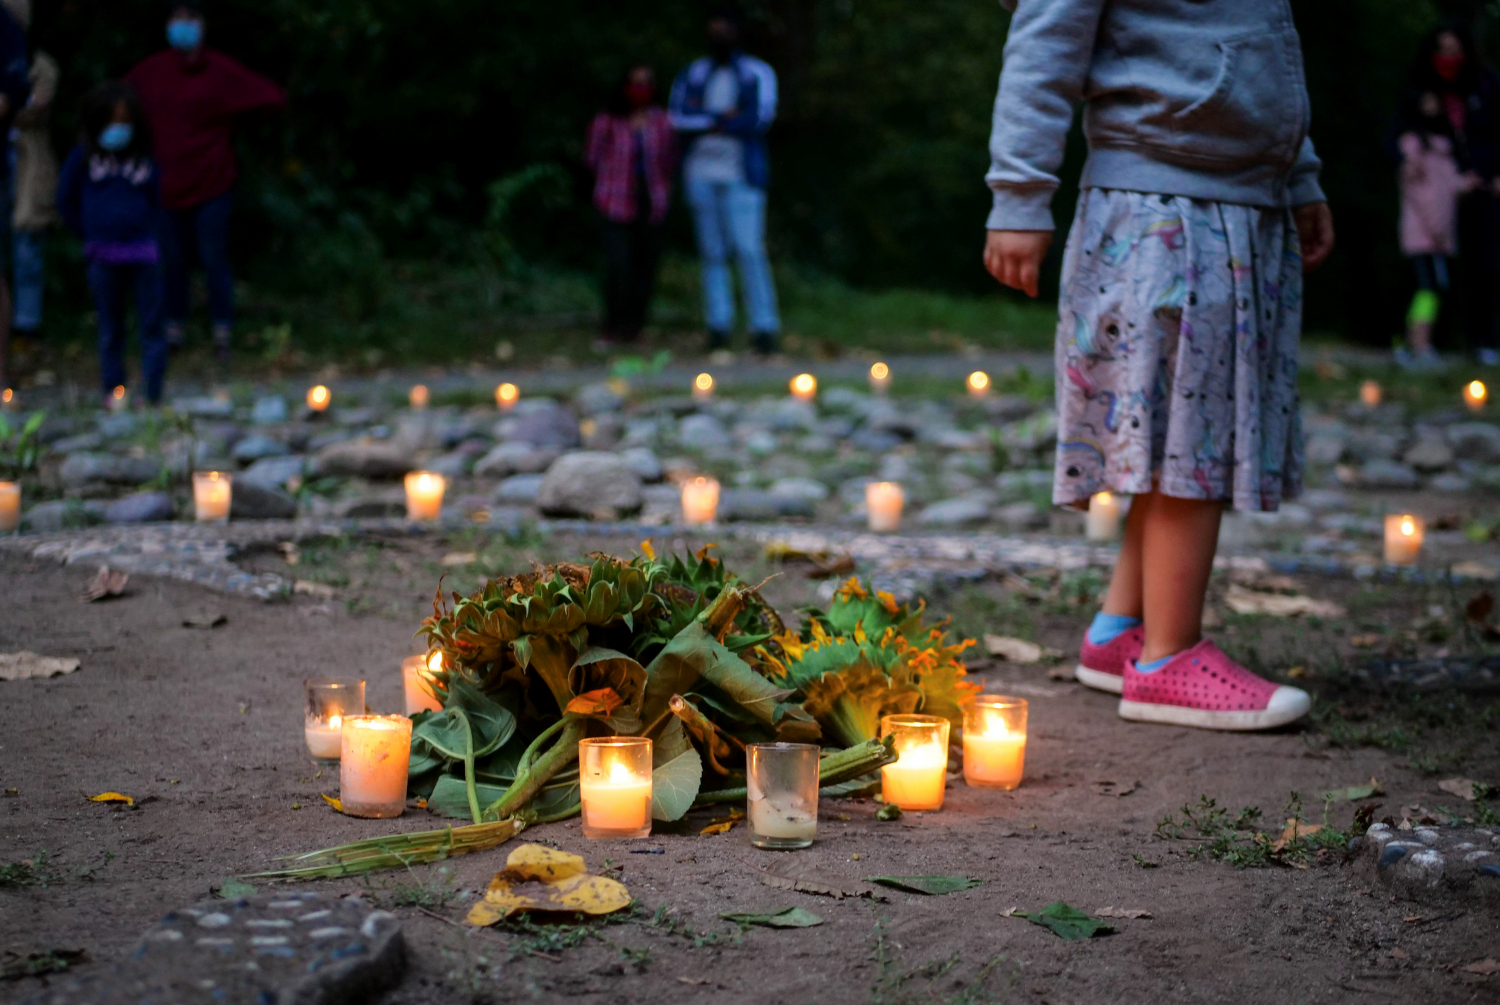 A pile of sunflower heads on the ground, surrounded by lit tealights, with more lit tealights and people in the background